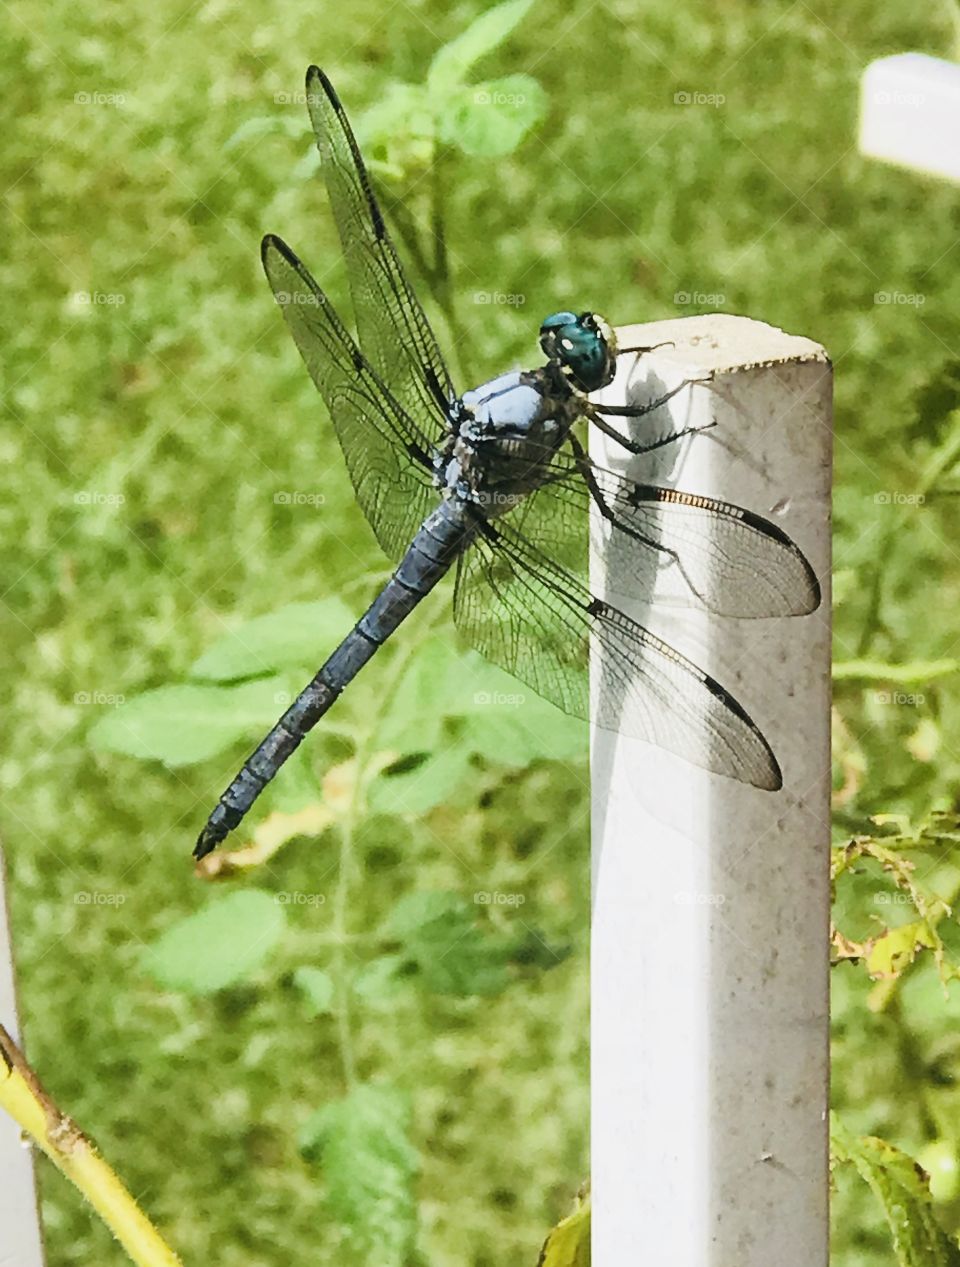 I love the beauty and color in this photo captured of a blue tinted dragonfly resting on a white post outdoors. 